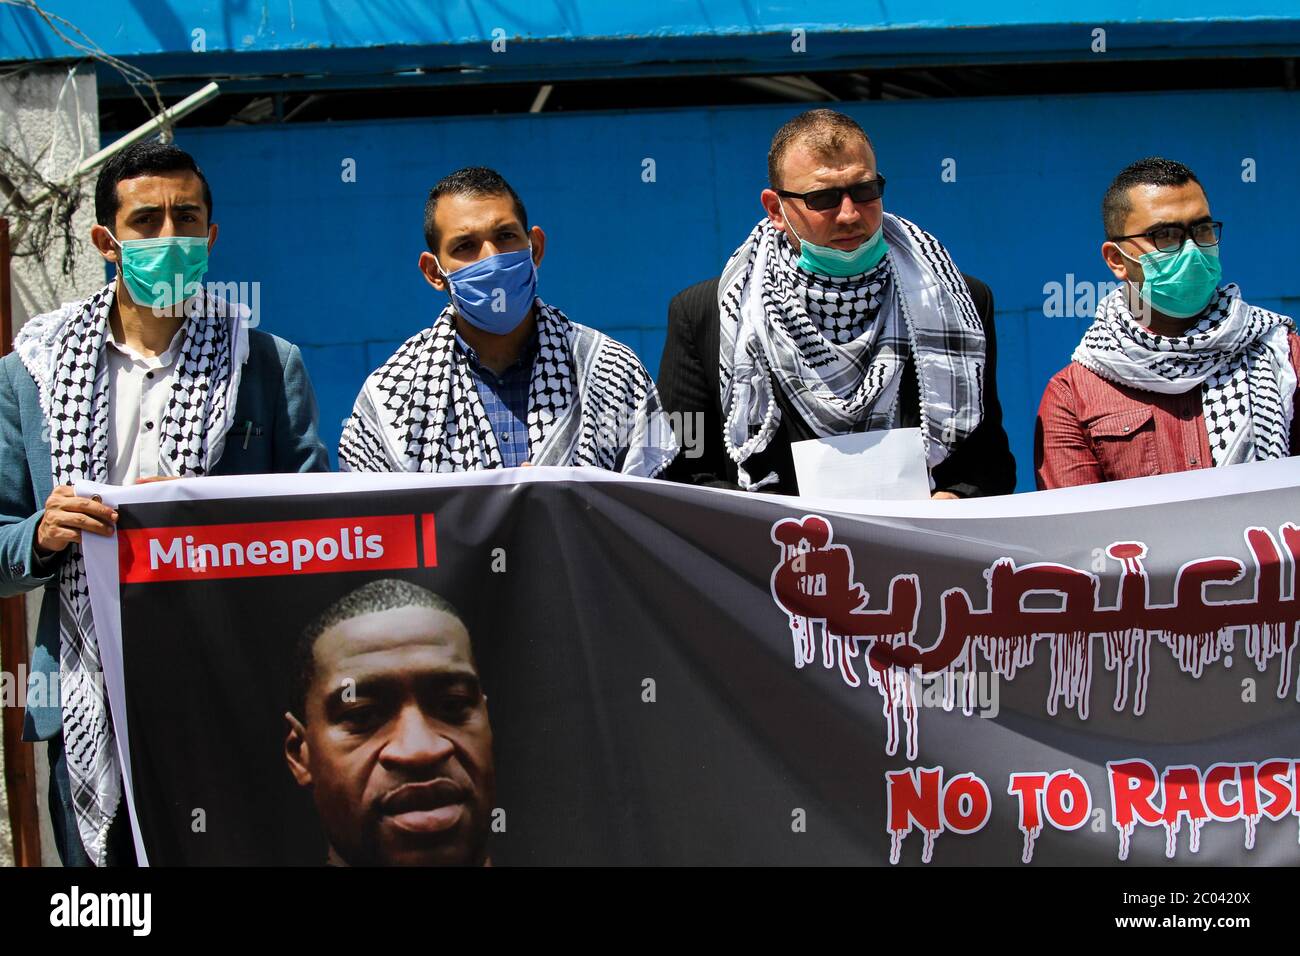 June 11, 2020: Gaza, Palestine. 11 June 2020. Palestinian hold a protest against racism outside the UN headquarters in Gaza City. Participants raised a big banner of George Floyd, recently killed by the police in Minneapolis, and Iyad al Halaq, killed by Israeli police in Jerusalem on 30 May. Israeli police killed Iyad on his way to school for holding a 'suspicious object'', despite knowing of his special needs. Palestinians are not optimistic that an enquiry will bring justice or will change what the B'Tselem organisation denounce as 'Israel's reckless open-fire policy, authorised by Stock Photo